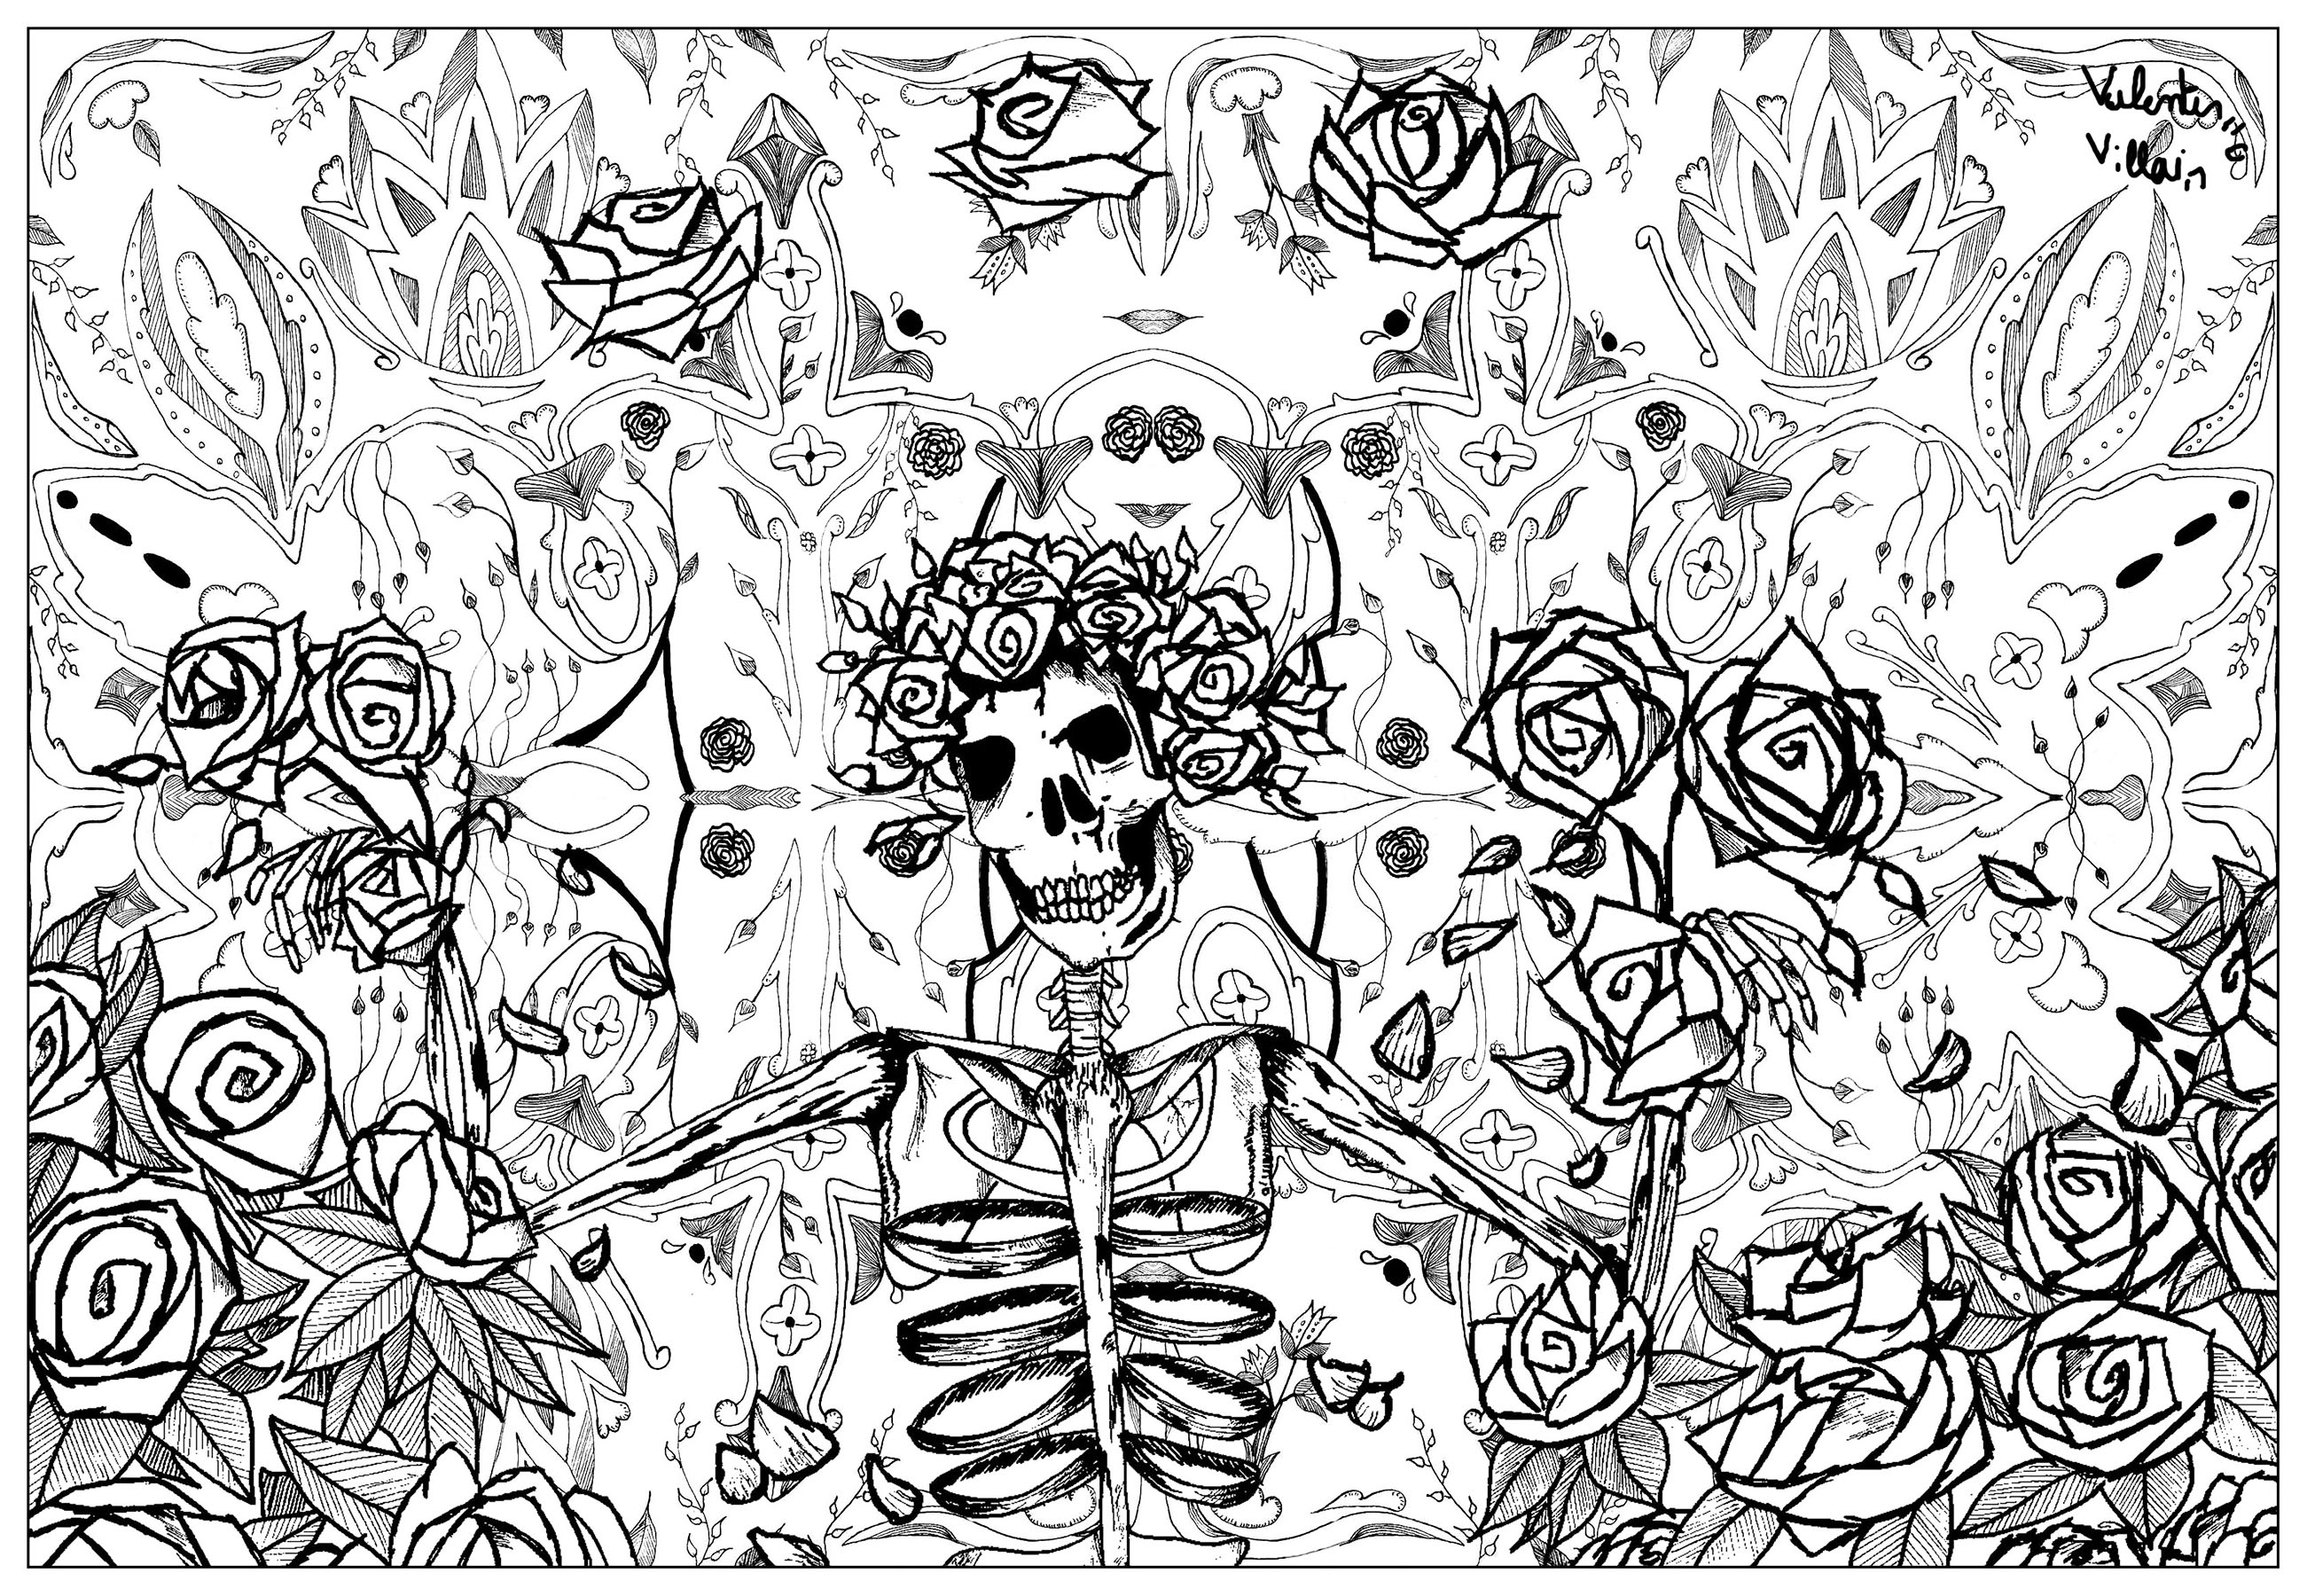 Original illustration inspired by the visuals of the American rock band Grateful Dead. Grateful dead is considered one of the main representatives of the psychedelic movement.This coloring page is perfect for music and psychedelic lovers. It will allow you to immerse yourself in a unique universe and develop your creativity, Artist : Valentin